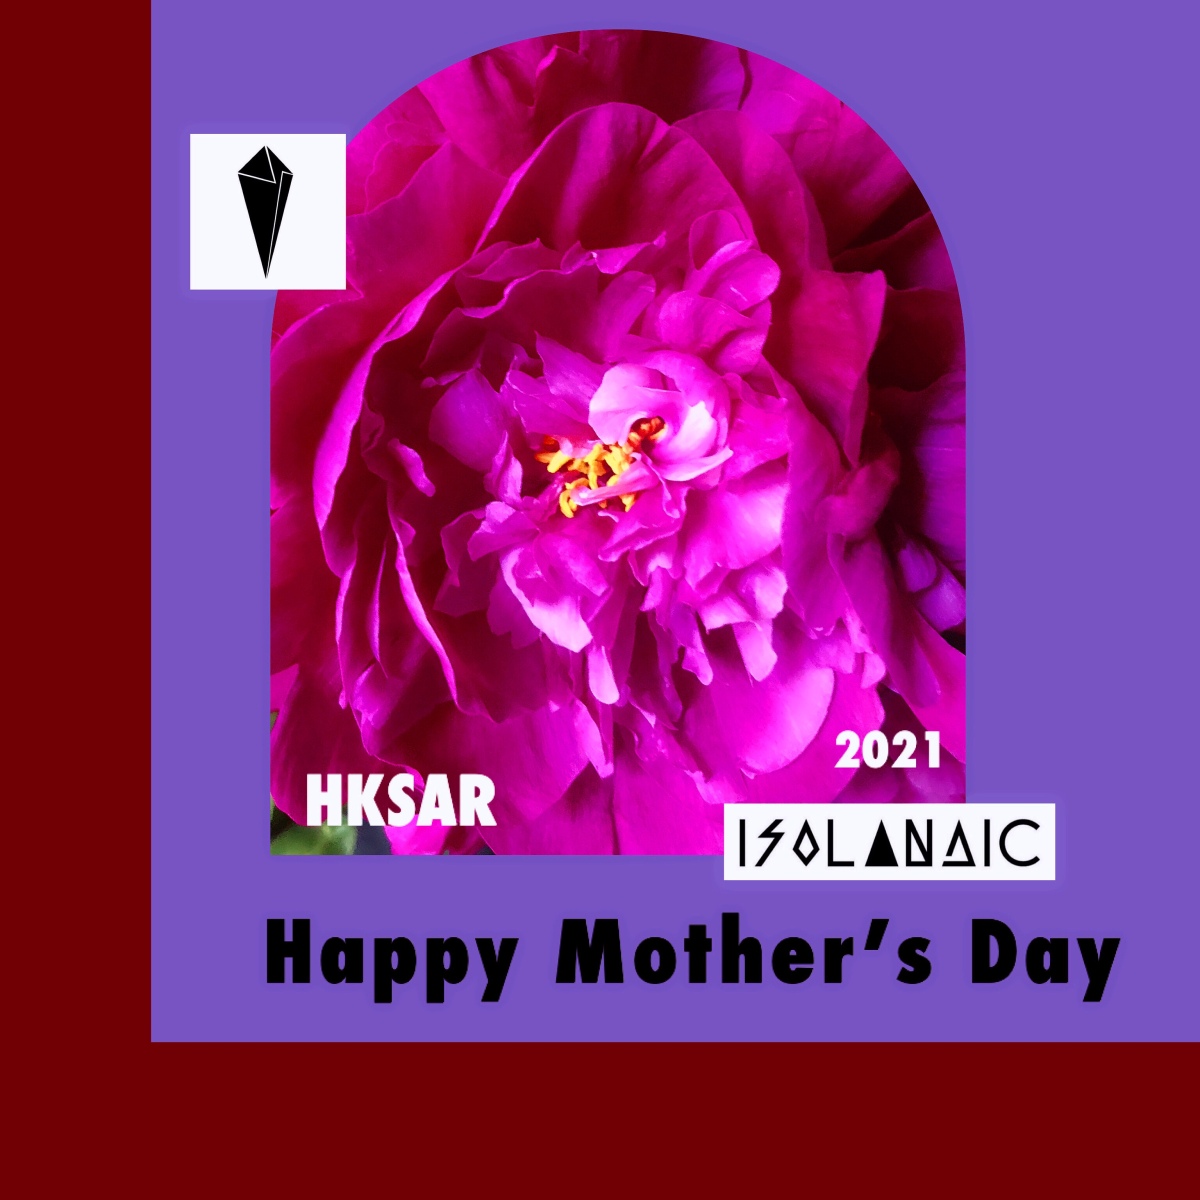 Happy Mother’s Day 2021